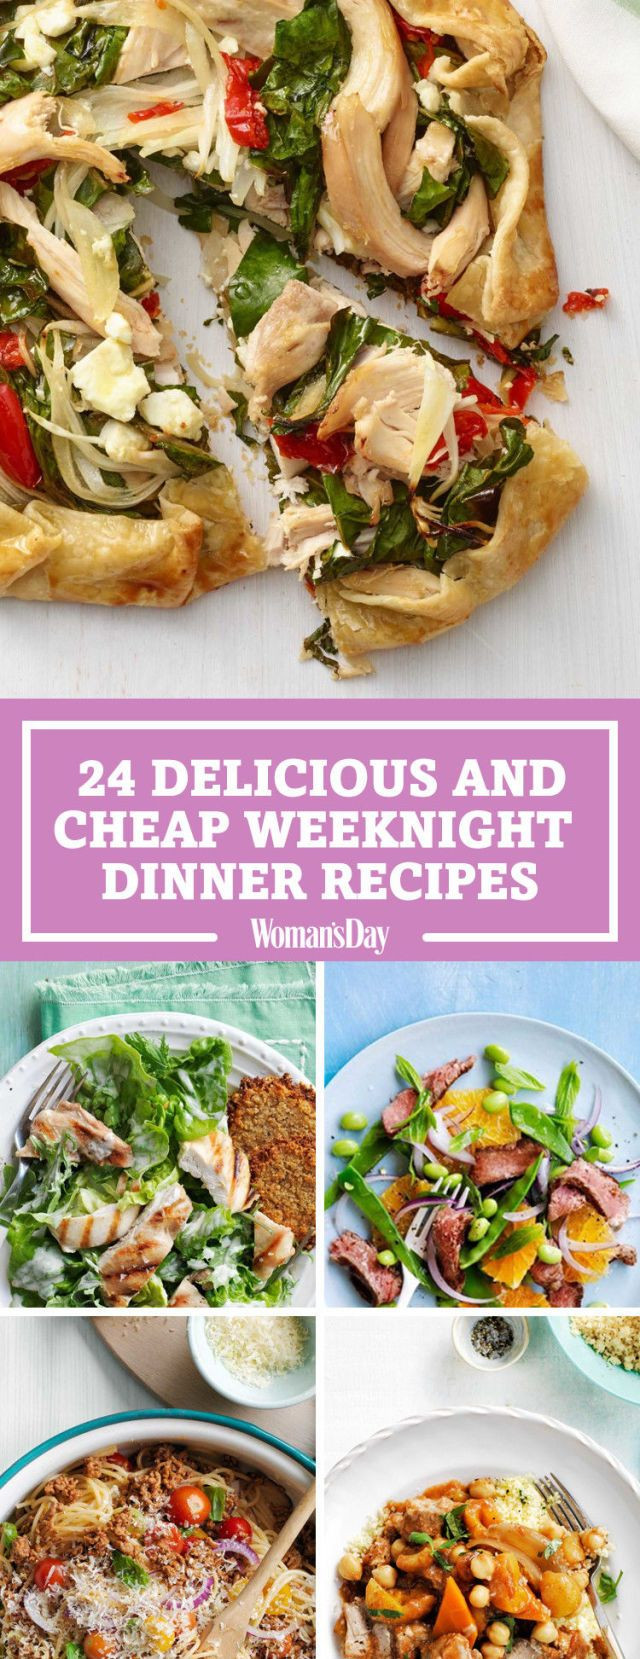 Easy And Cheap Dinner Ideas
 100 Cheap Dinner Ideas – Easy Recipes for Inexpensive Meals